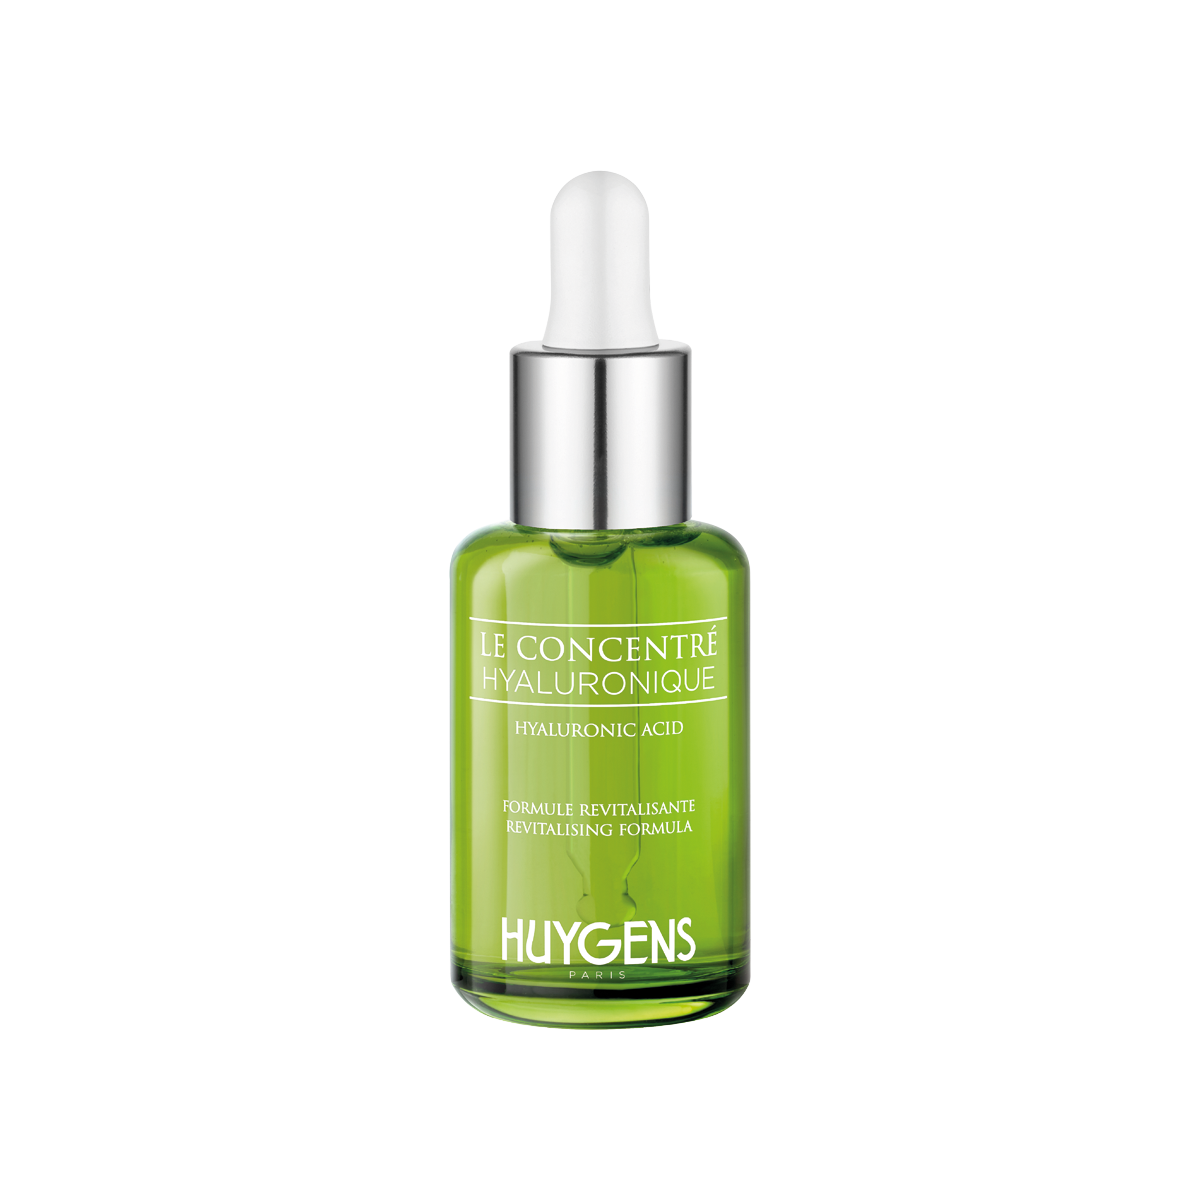 Huygens - Hyaluronic Acid Concentrate